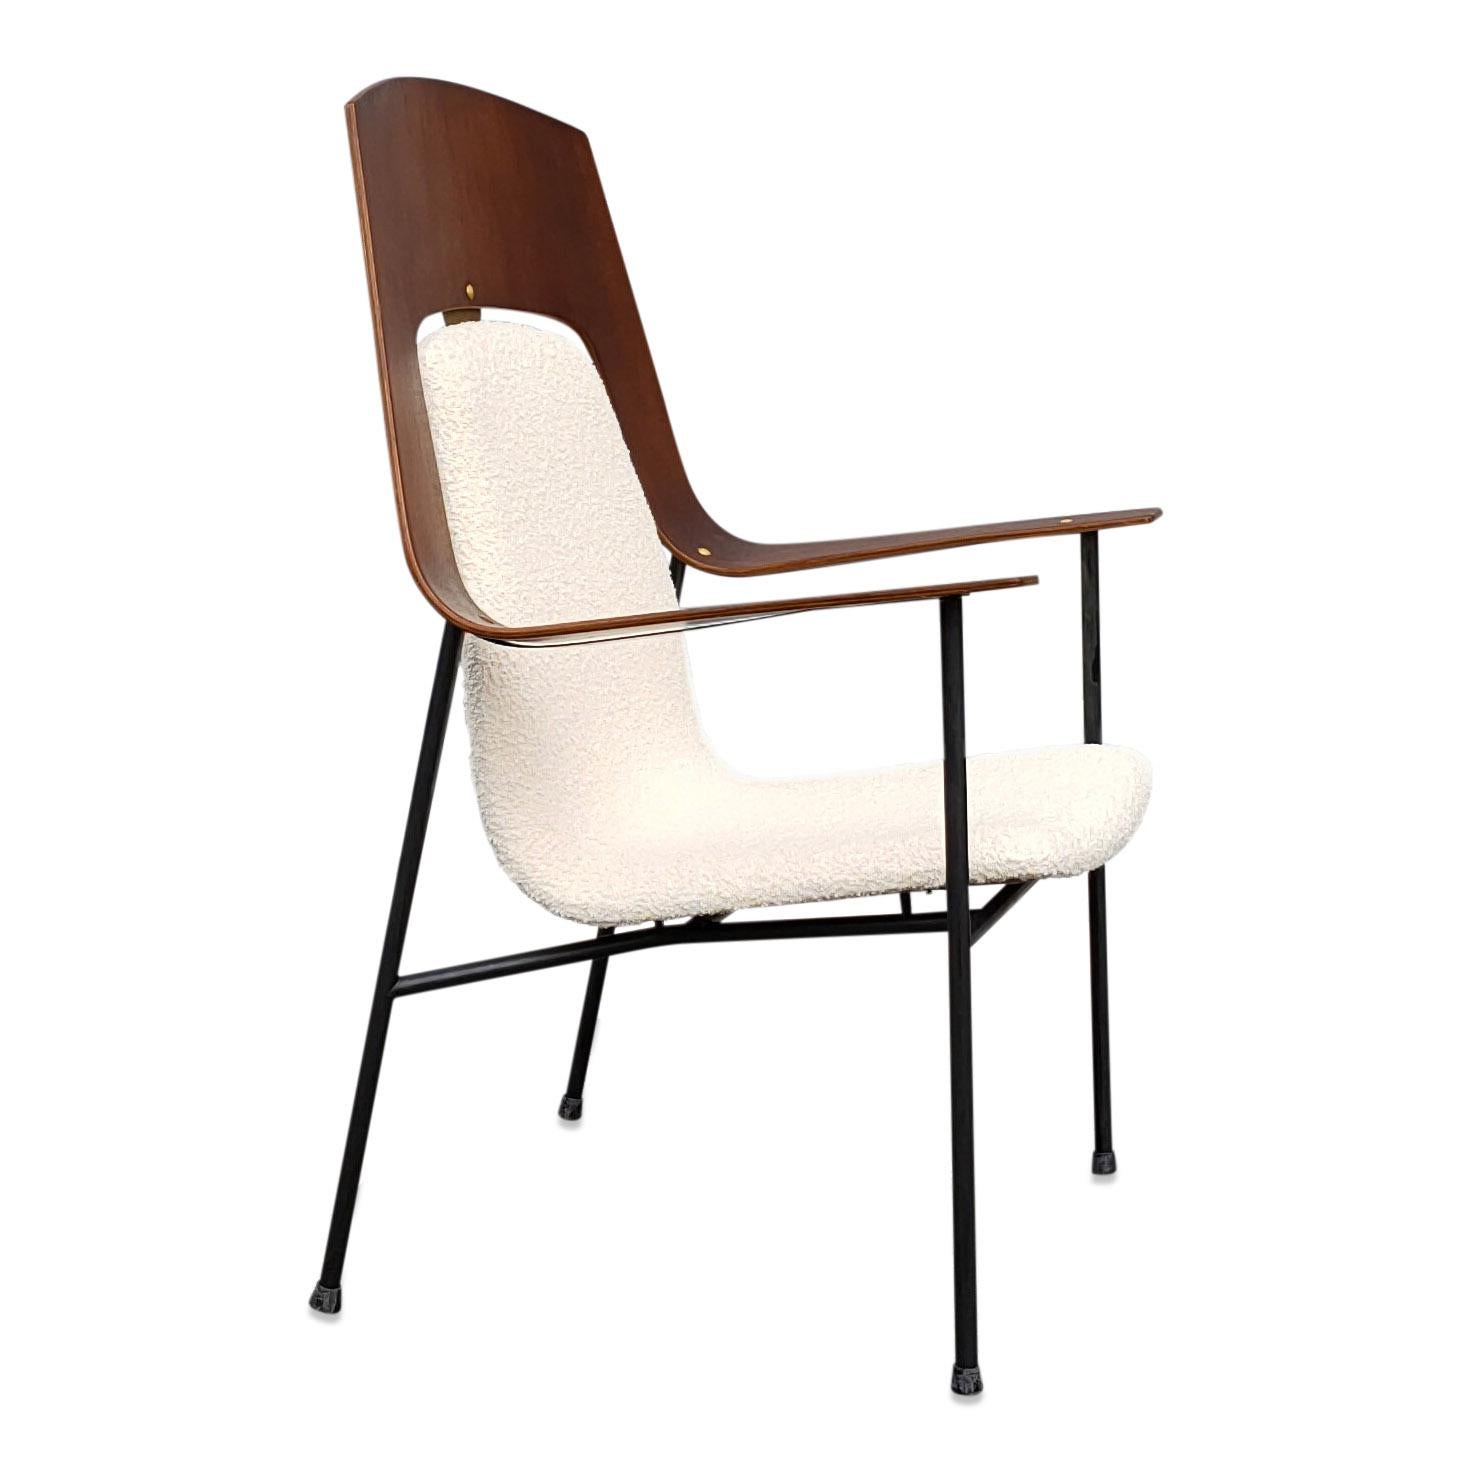 Midcentury Plywood and Cream White Armchair Attributed Robin Day, UK, 1960s In Good Condition For Sale In New York, NY